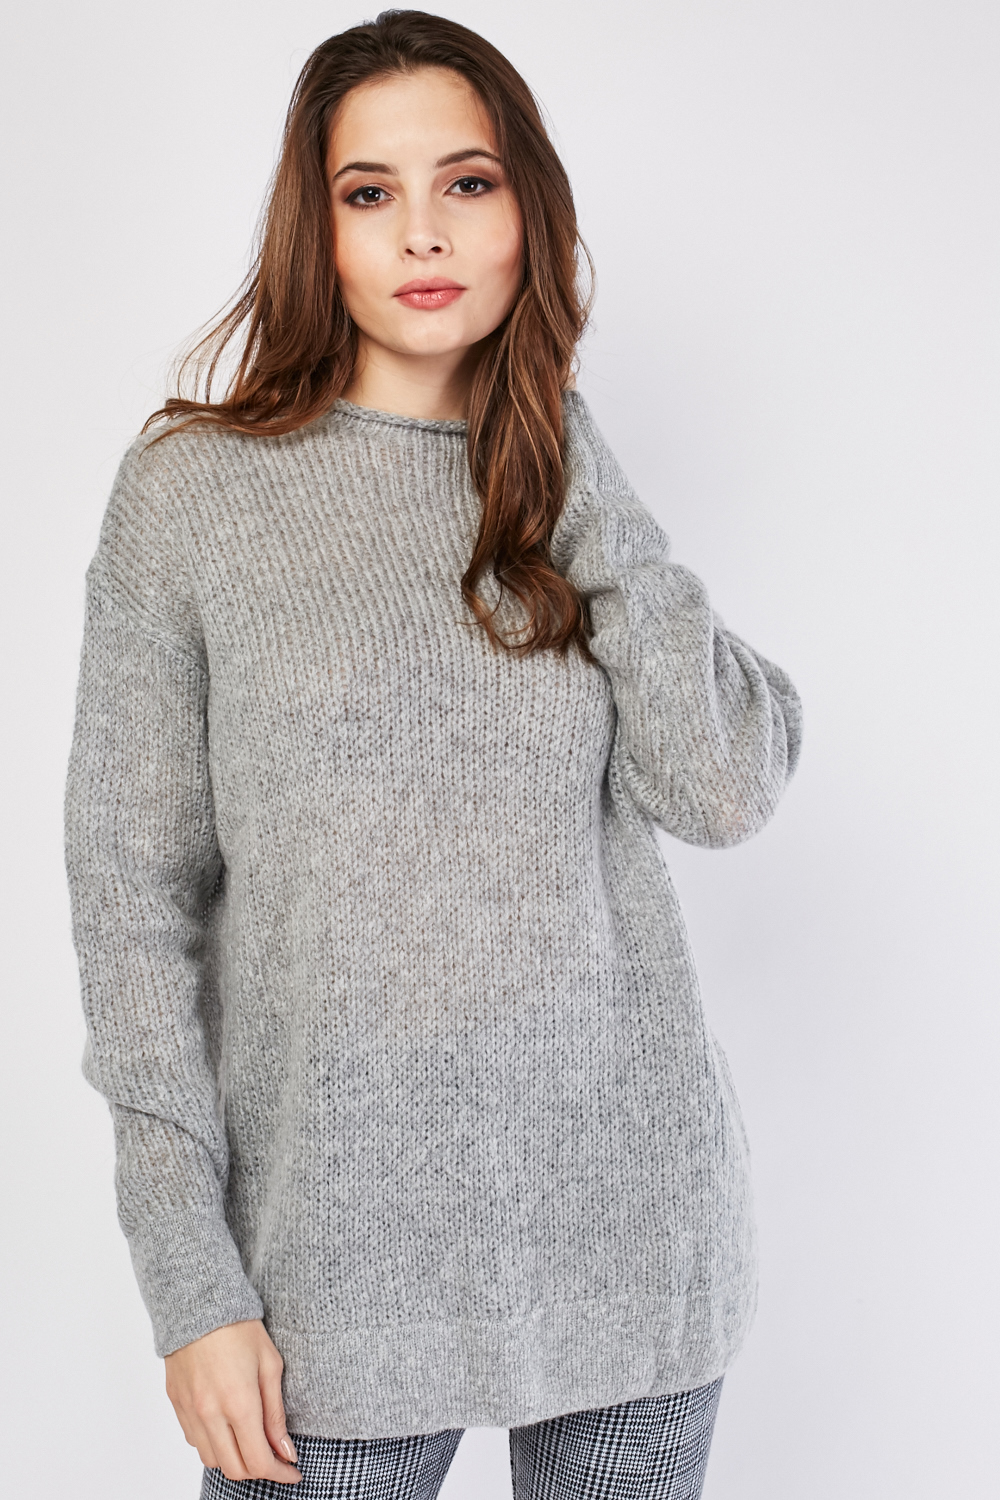 Loose Knit Slouchy Jumper - Just $6